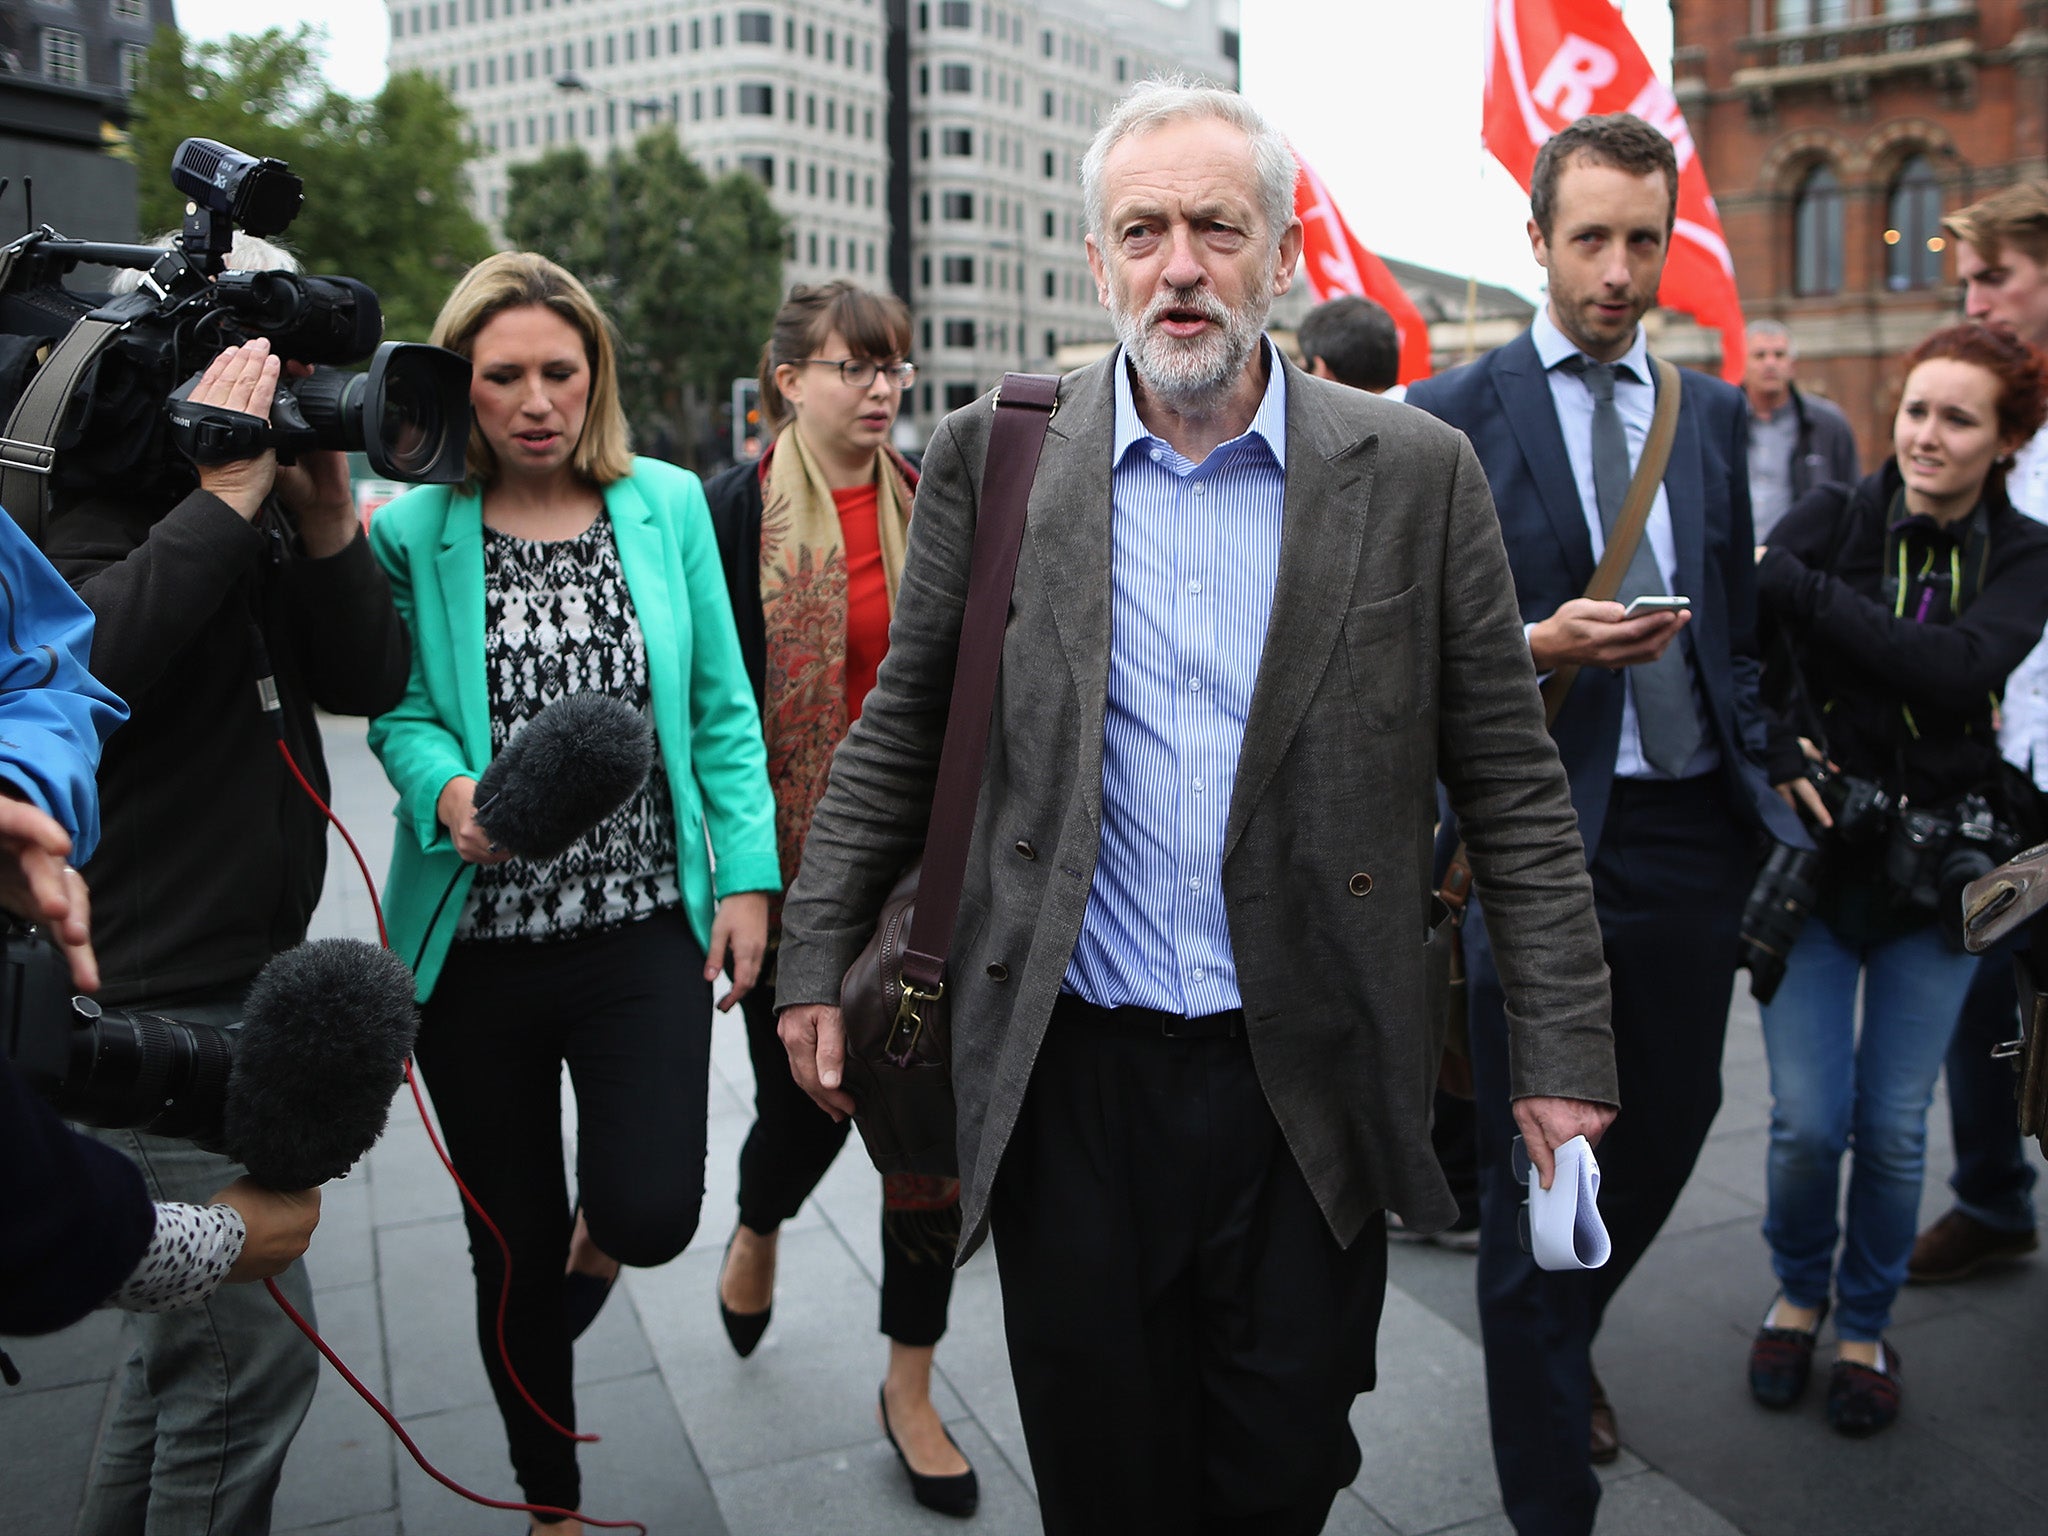 Jeremy Corbyn claims the BBC is "obsessed" with discrediting him